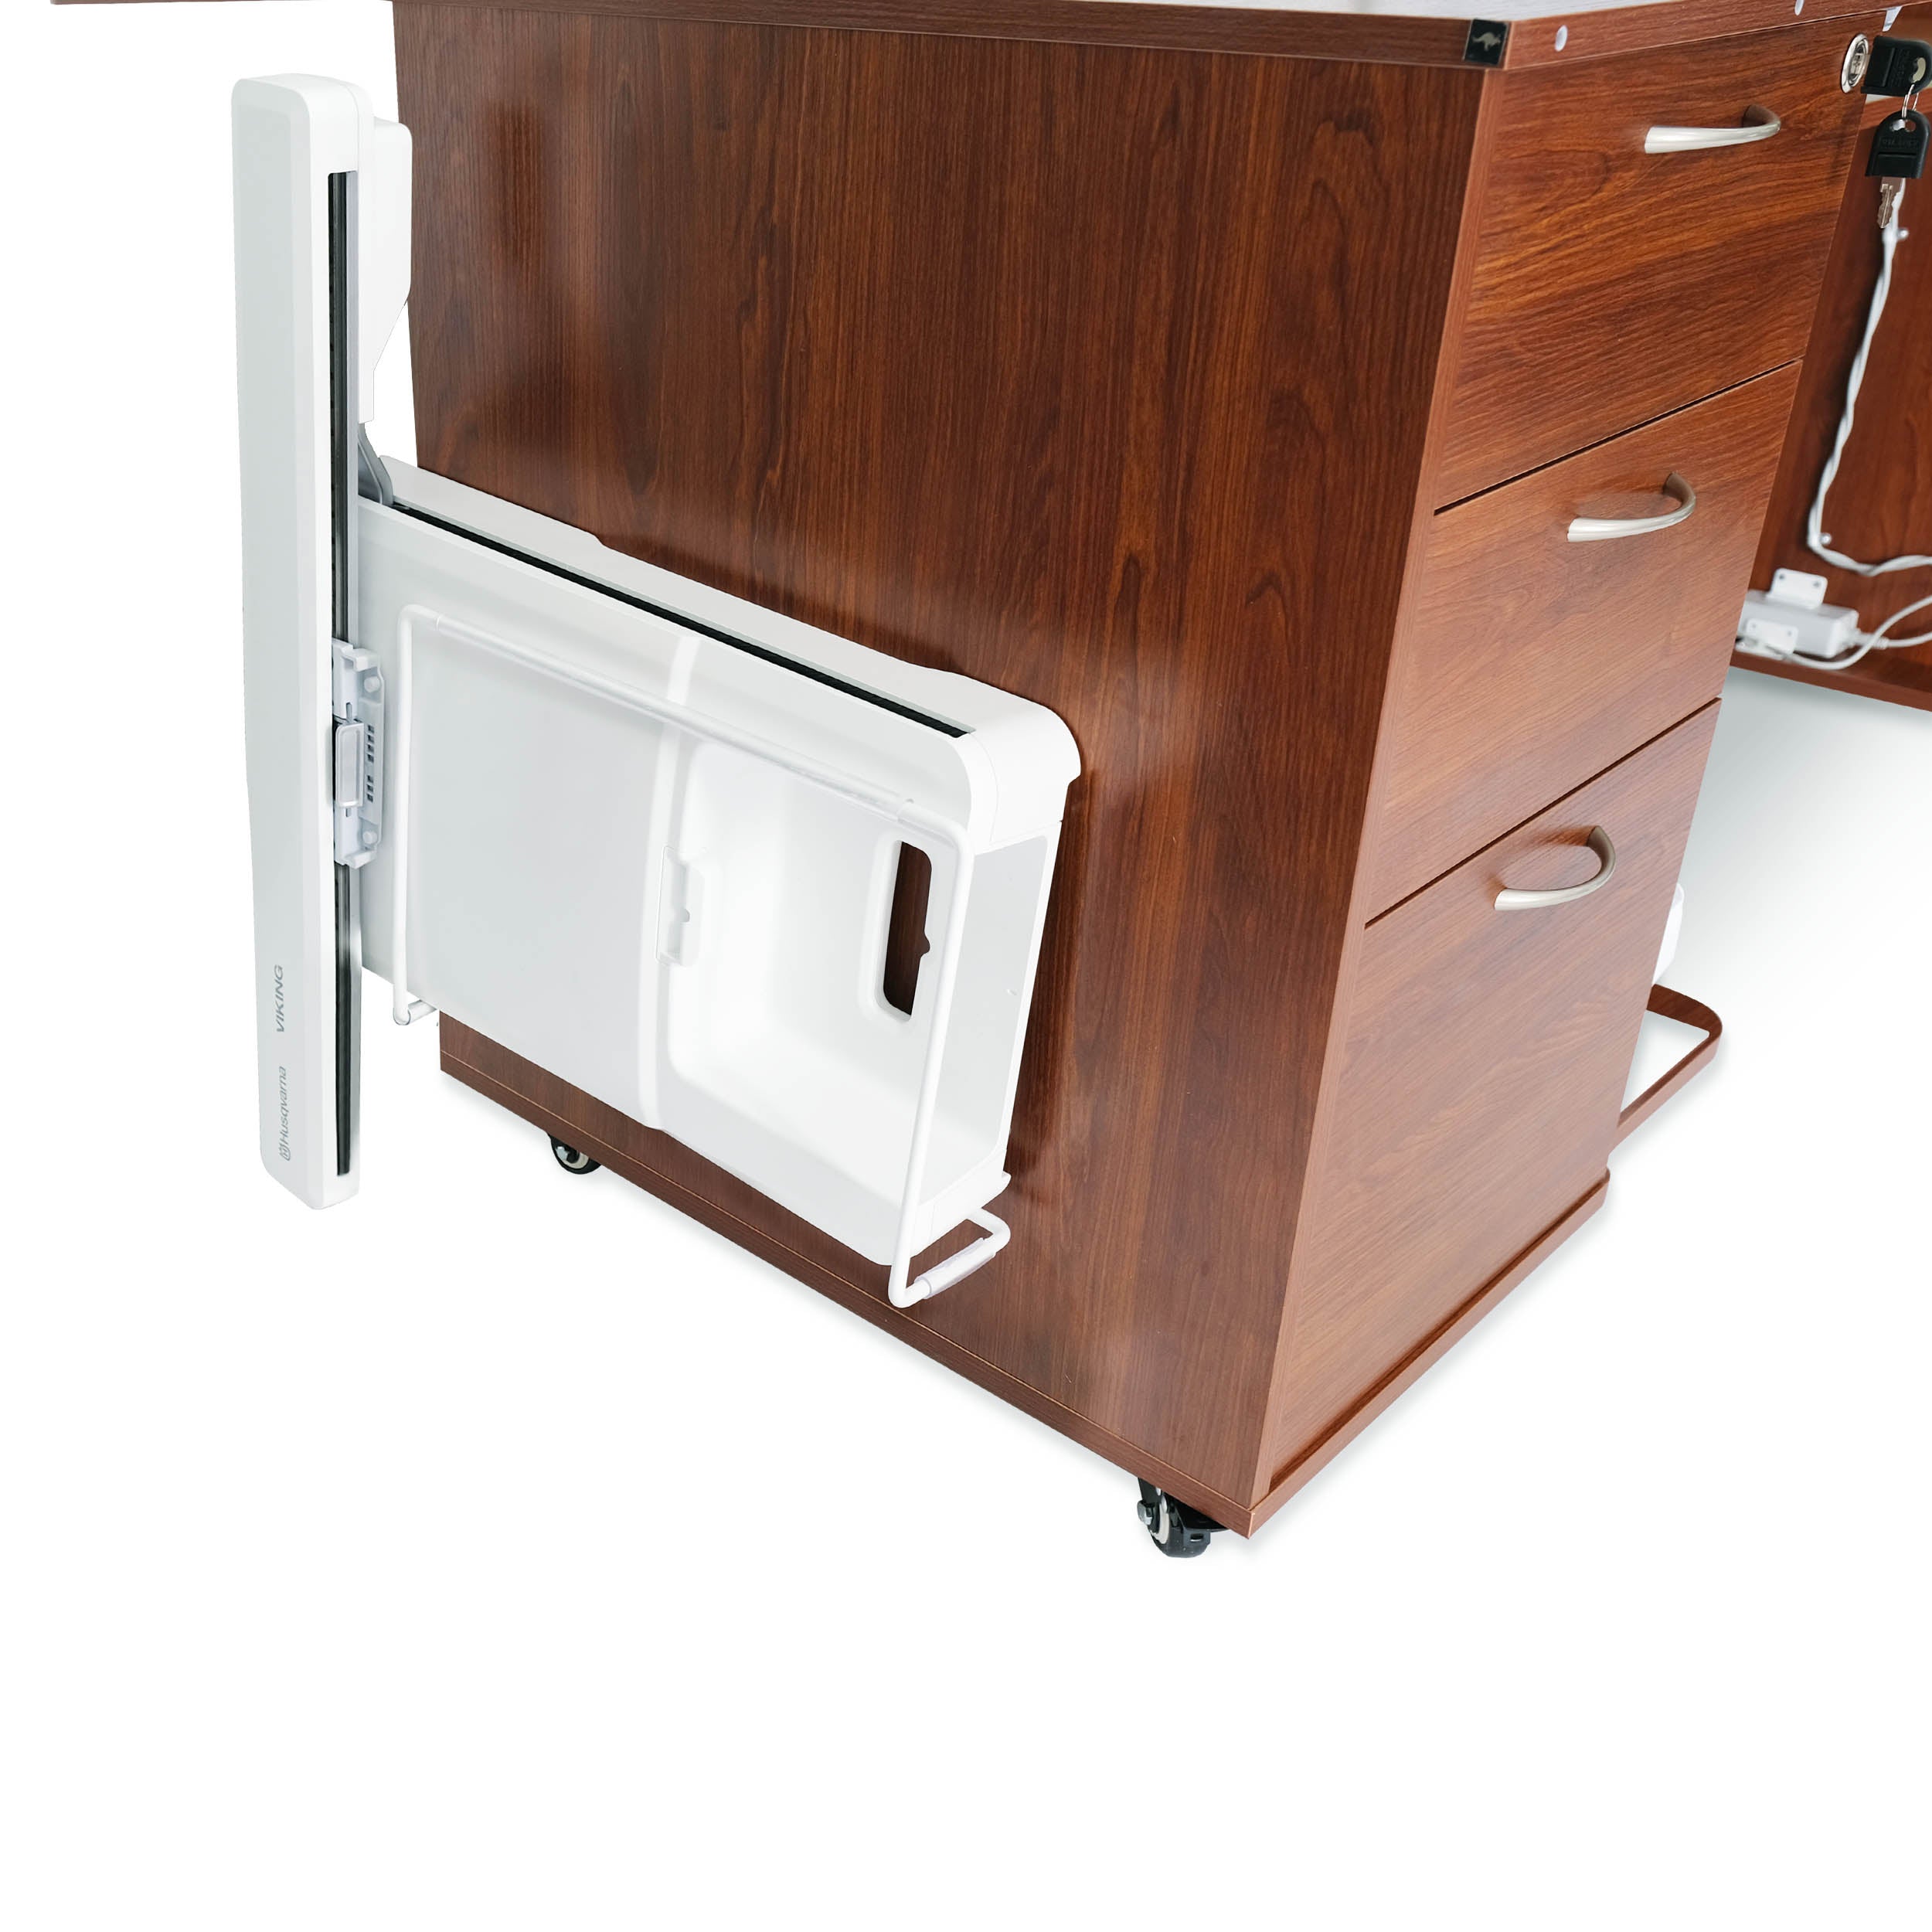 Sydney Sewing Cabinet - Teak Electric-Arrow Classic Sewing Furniture-My Favorite Quilt Store